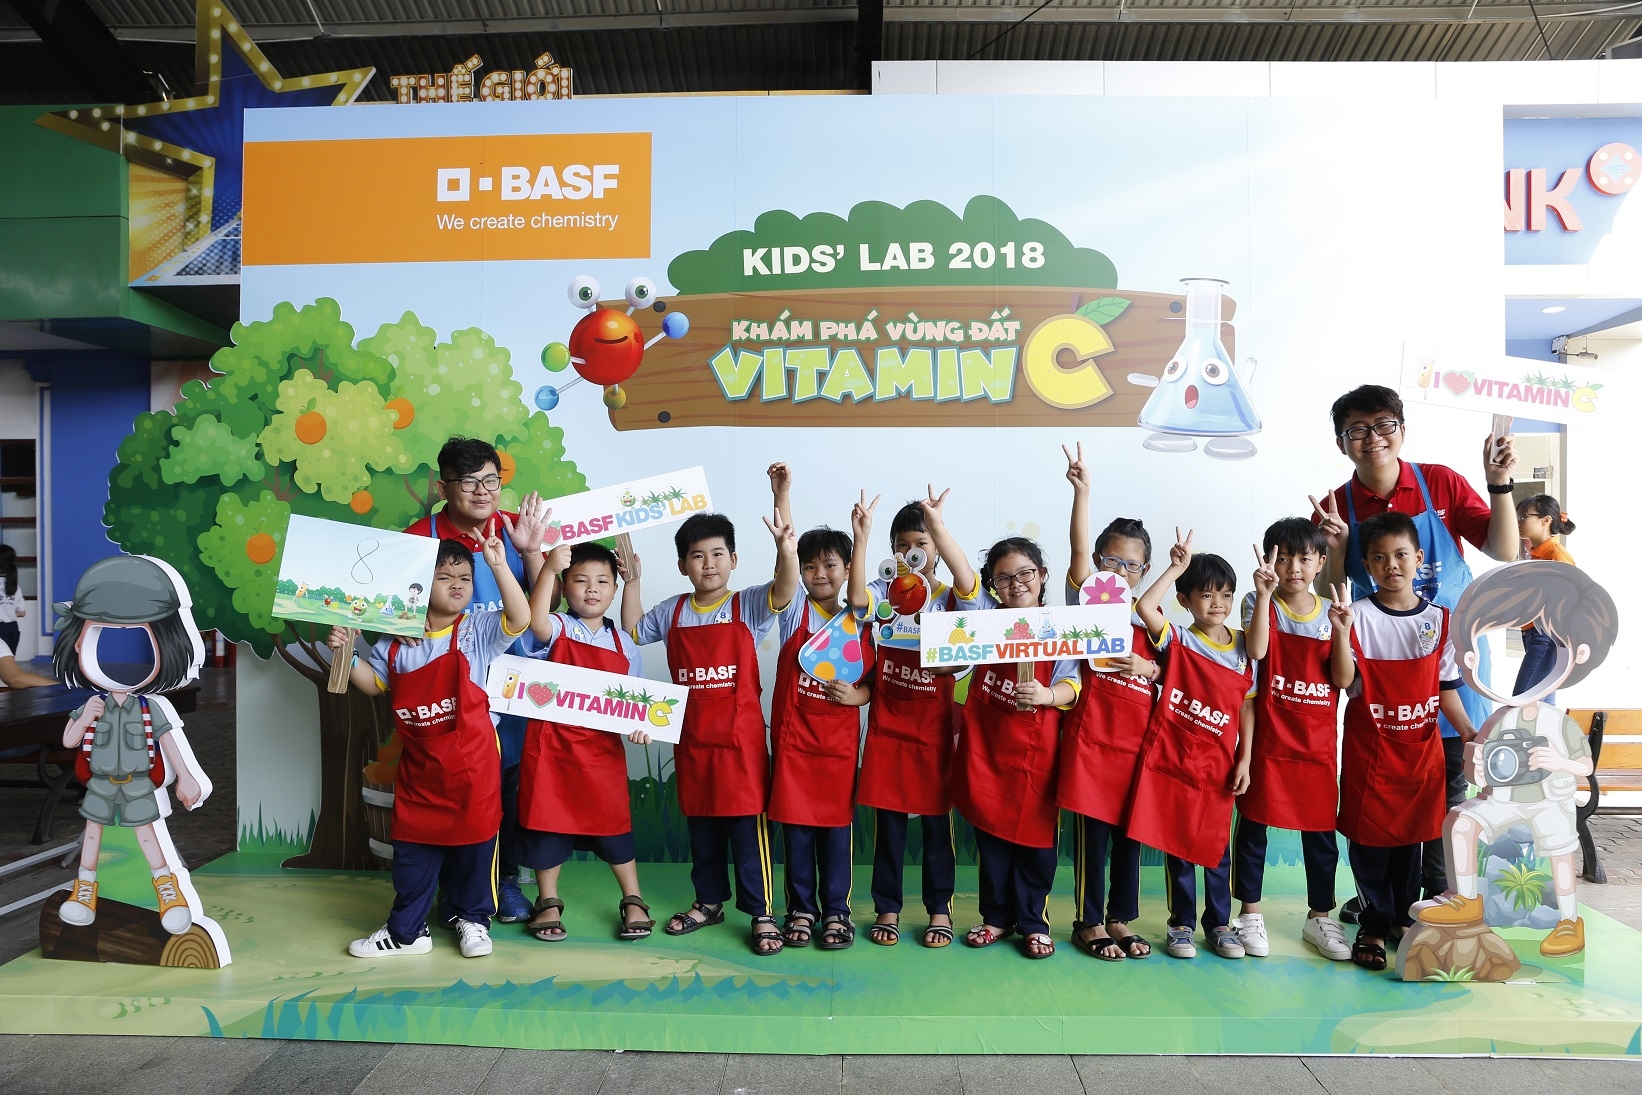 basf kids lab 2018 brings chemistry to the young and needy